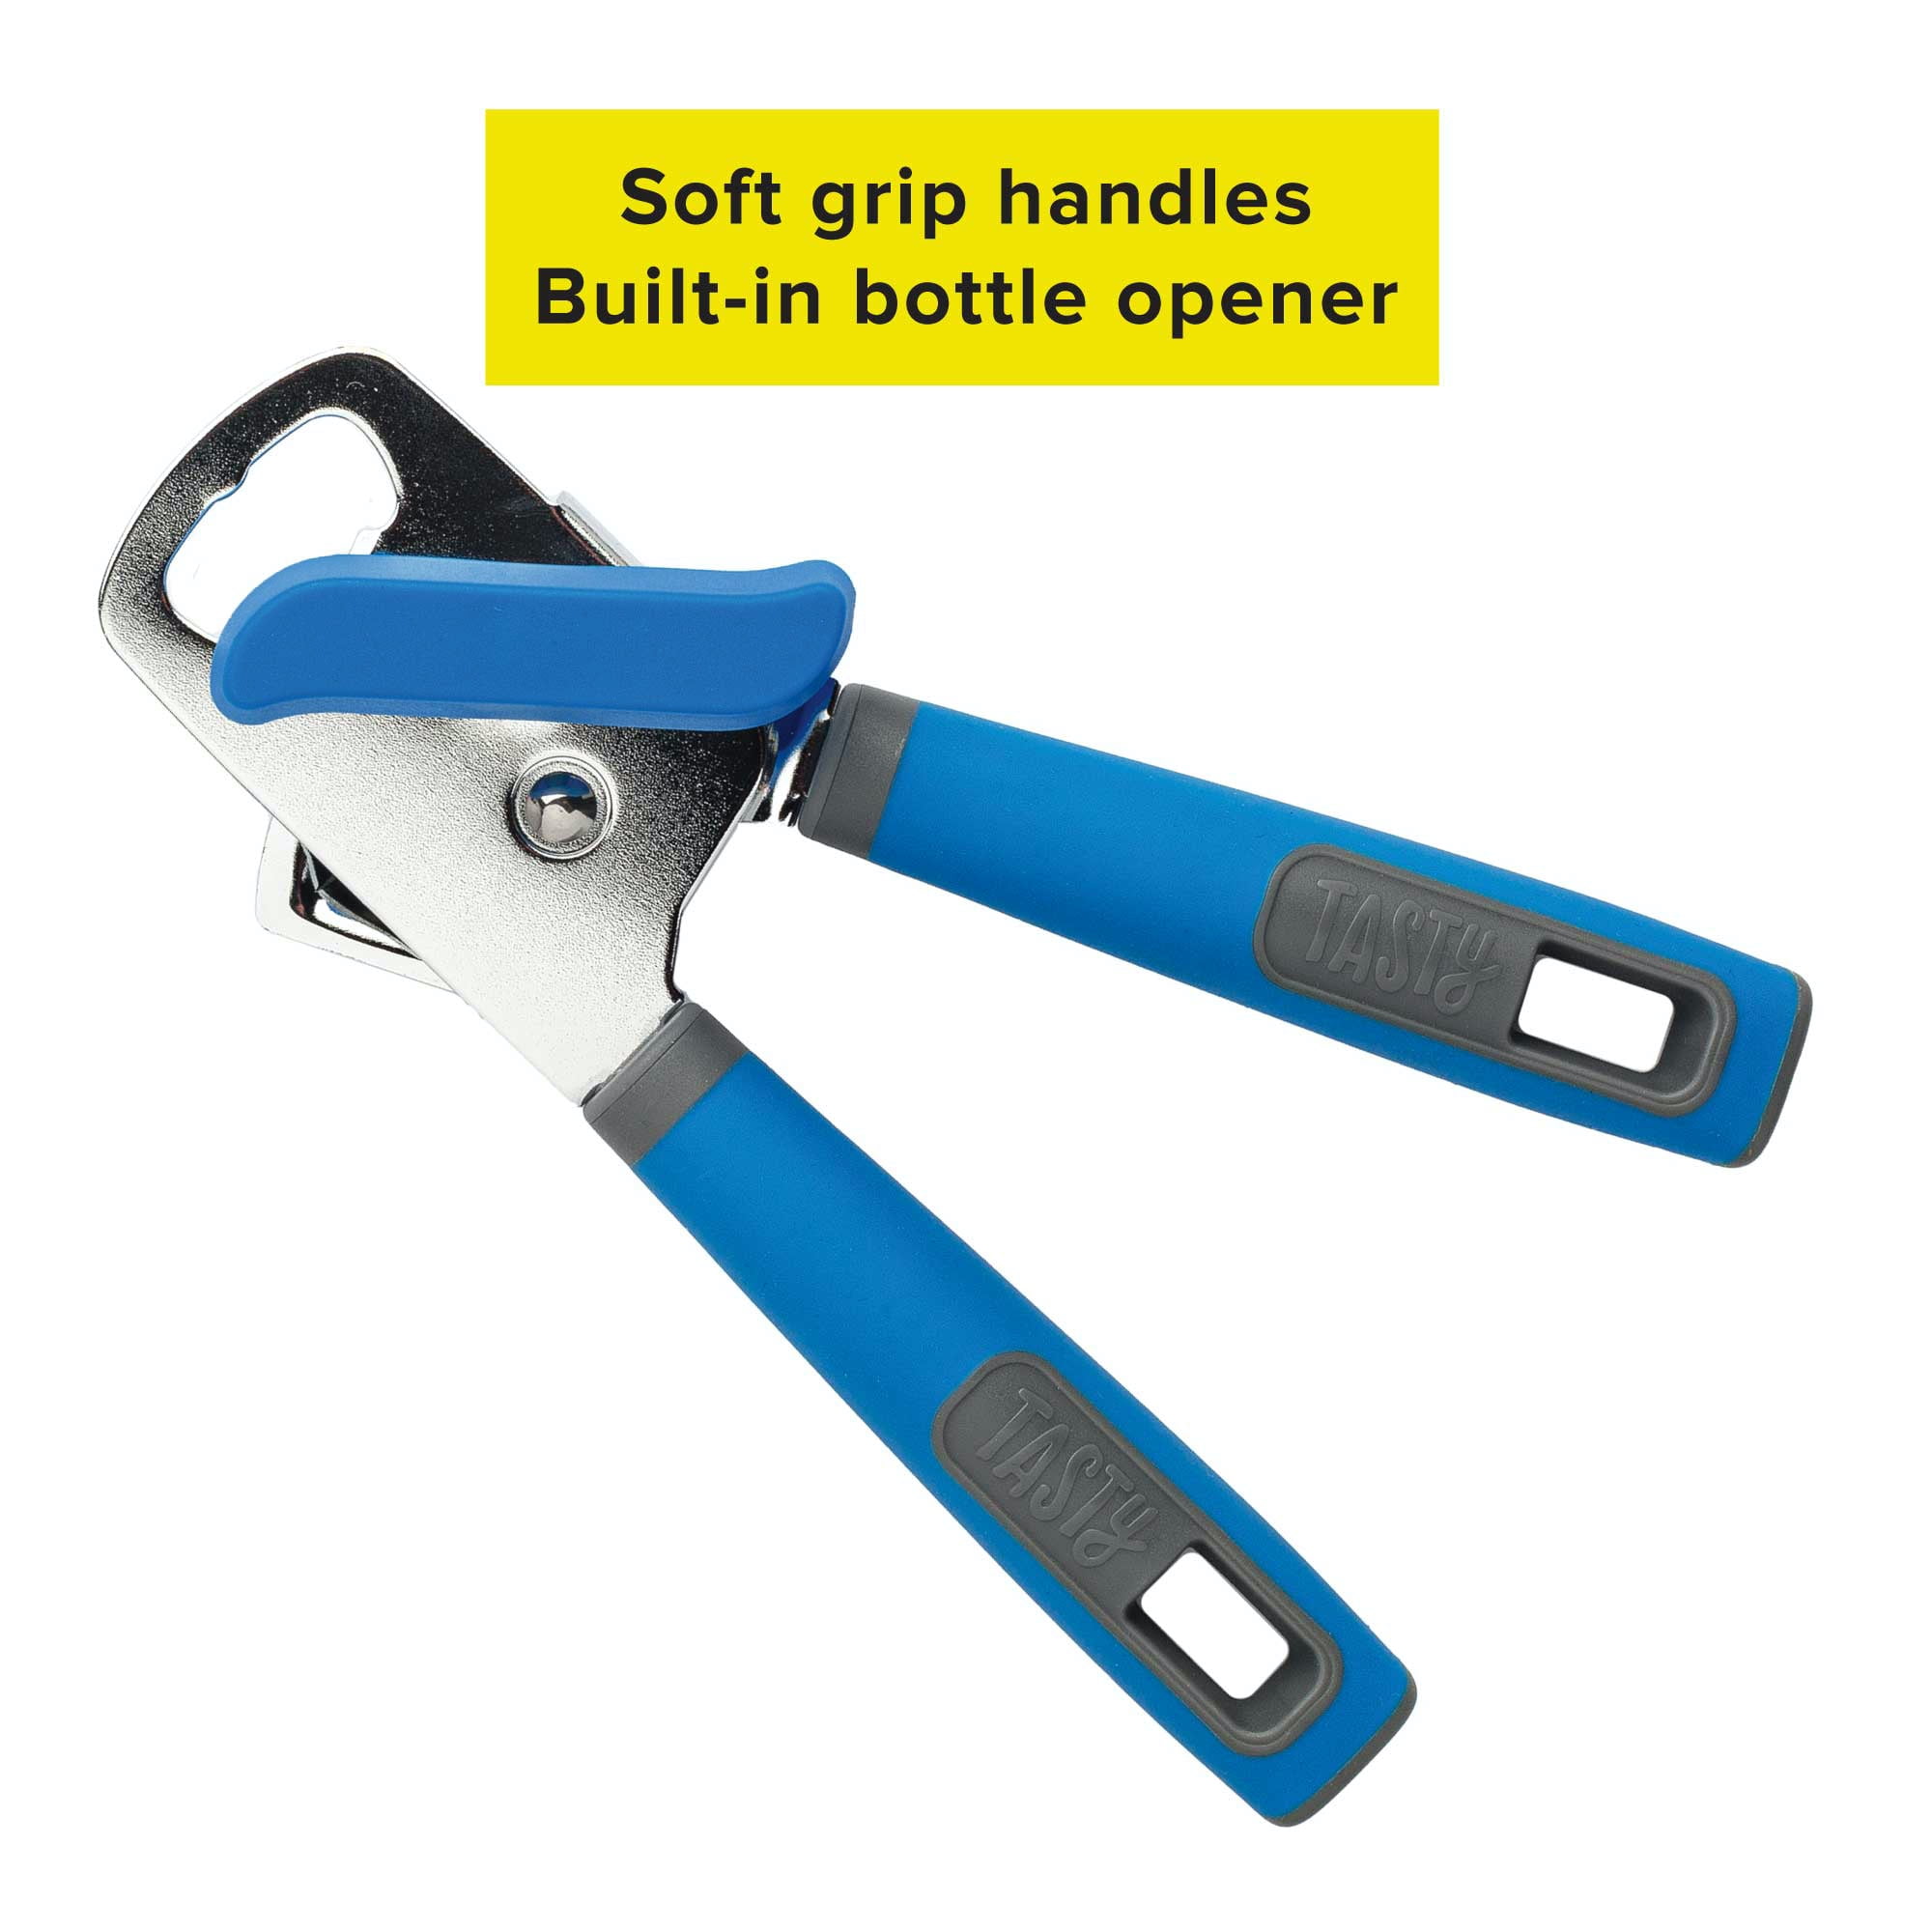 Copco Light Blue Stainless Steel Can Opener